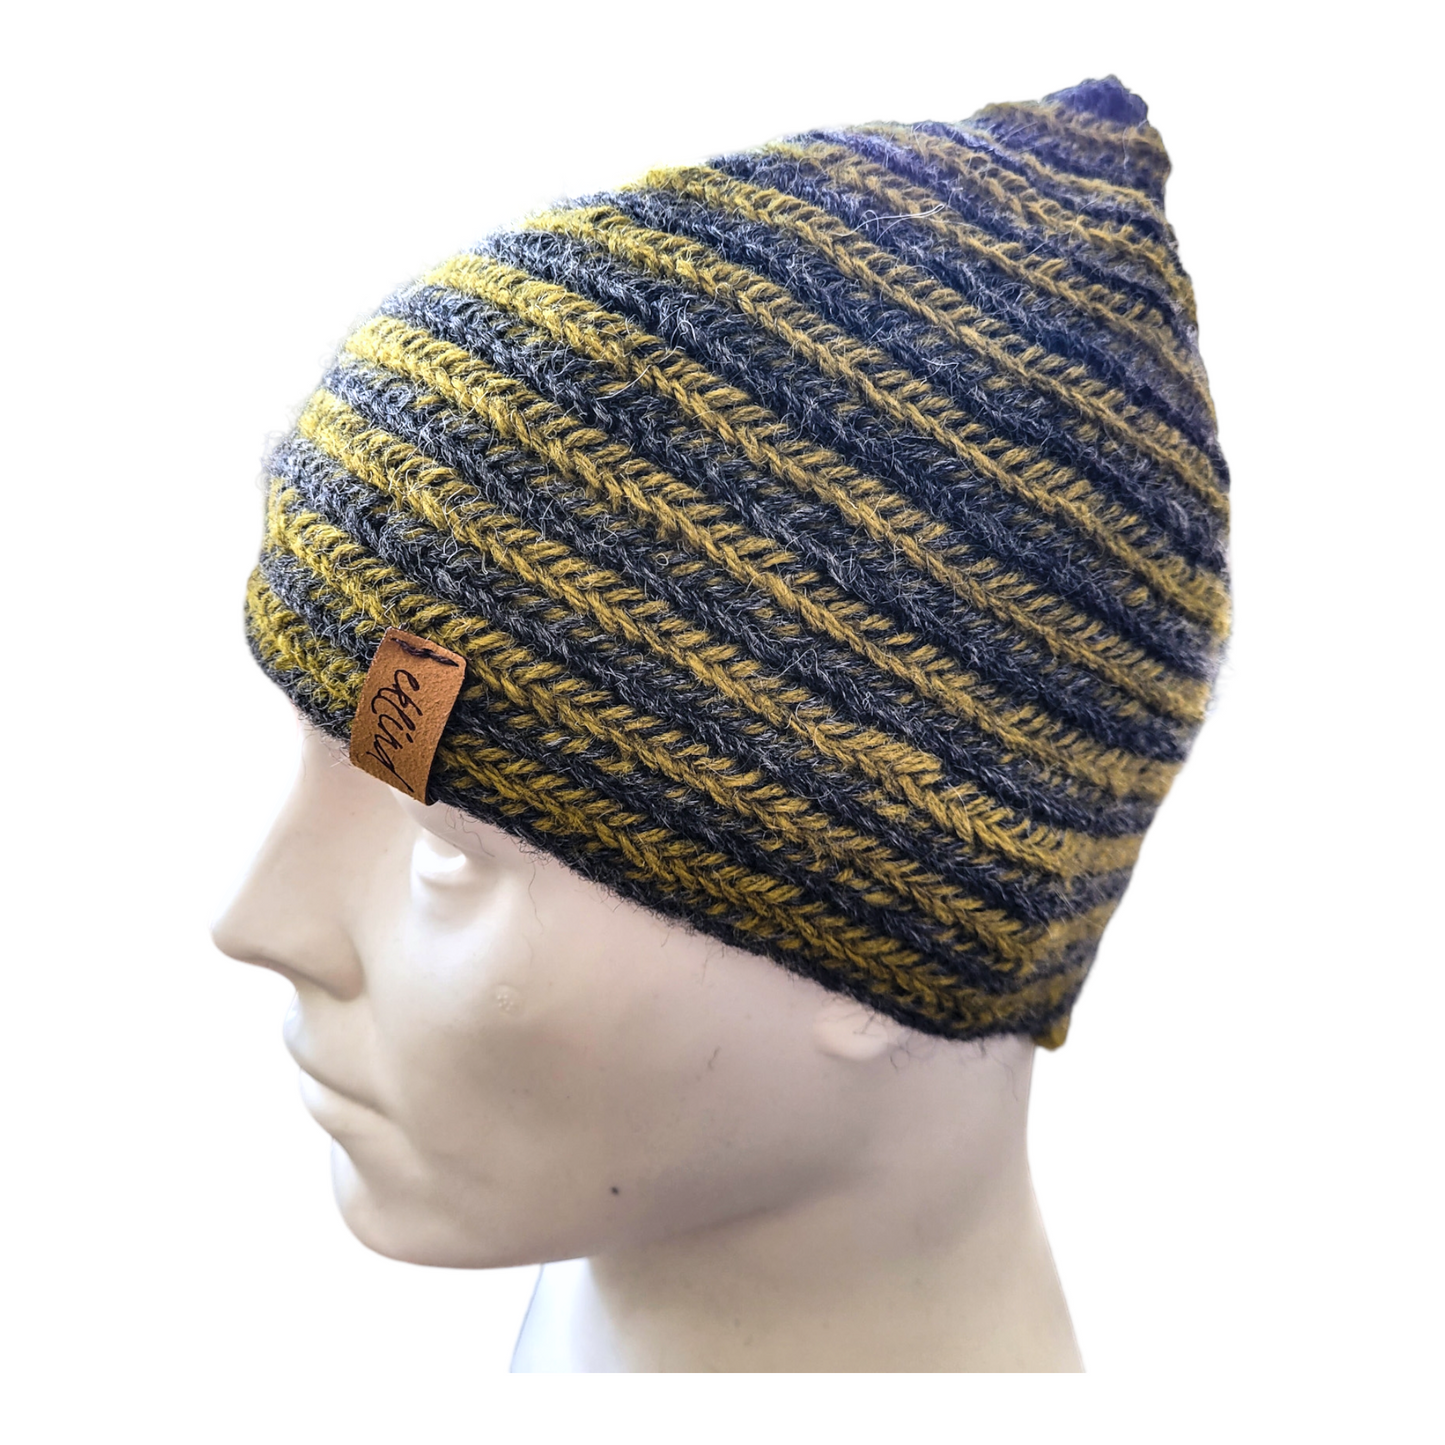 Nalbound slouchy hats